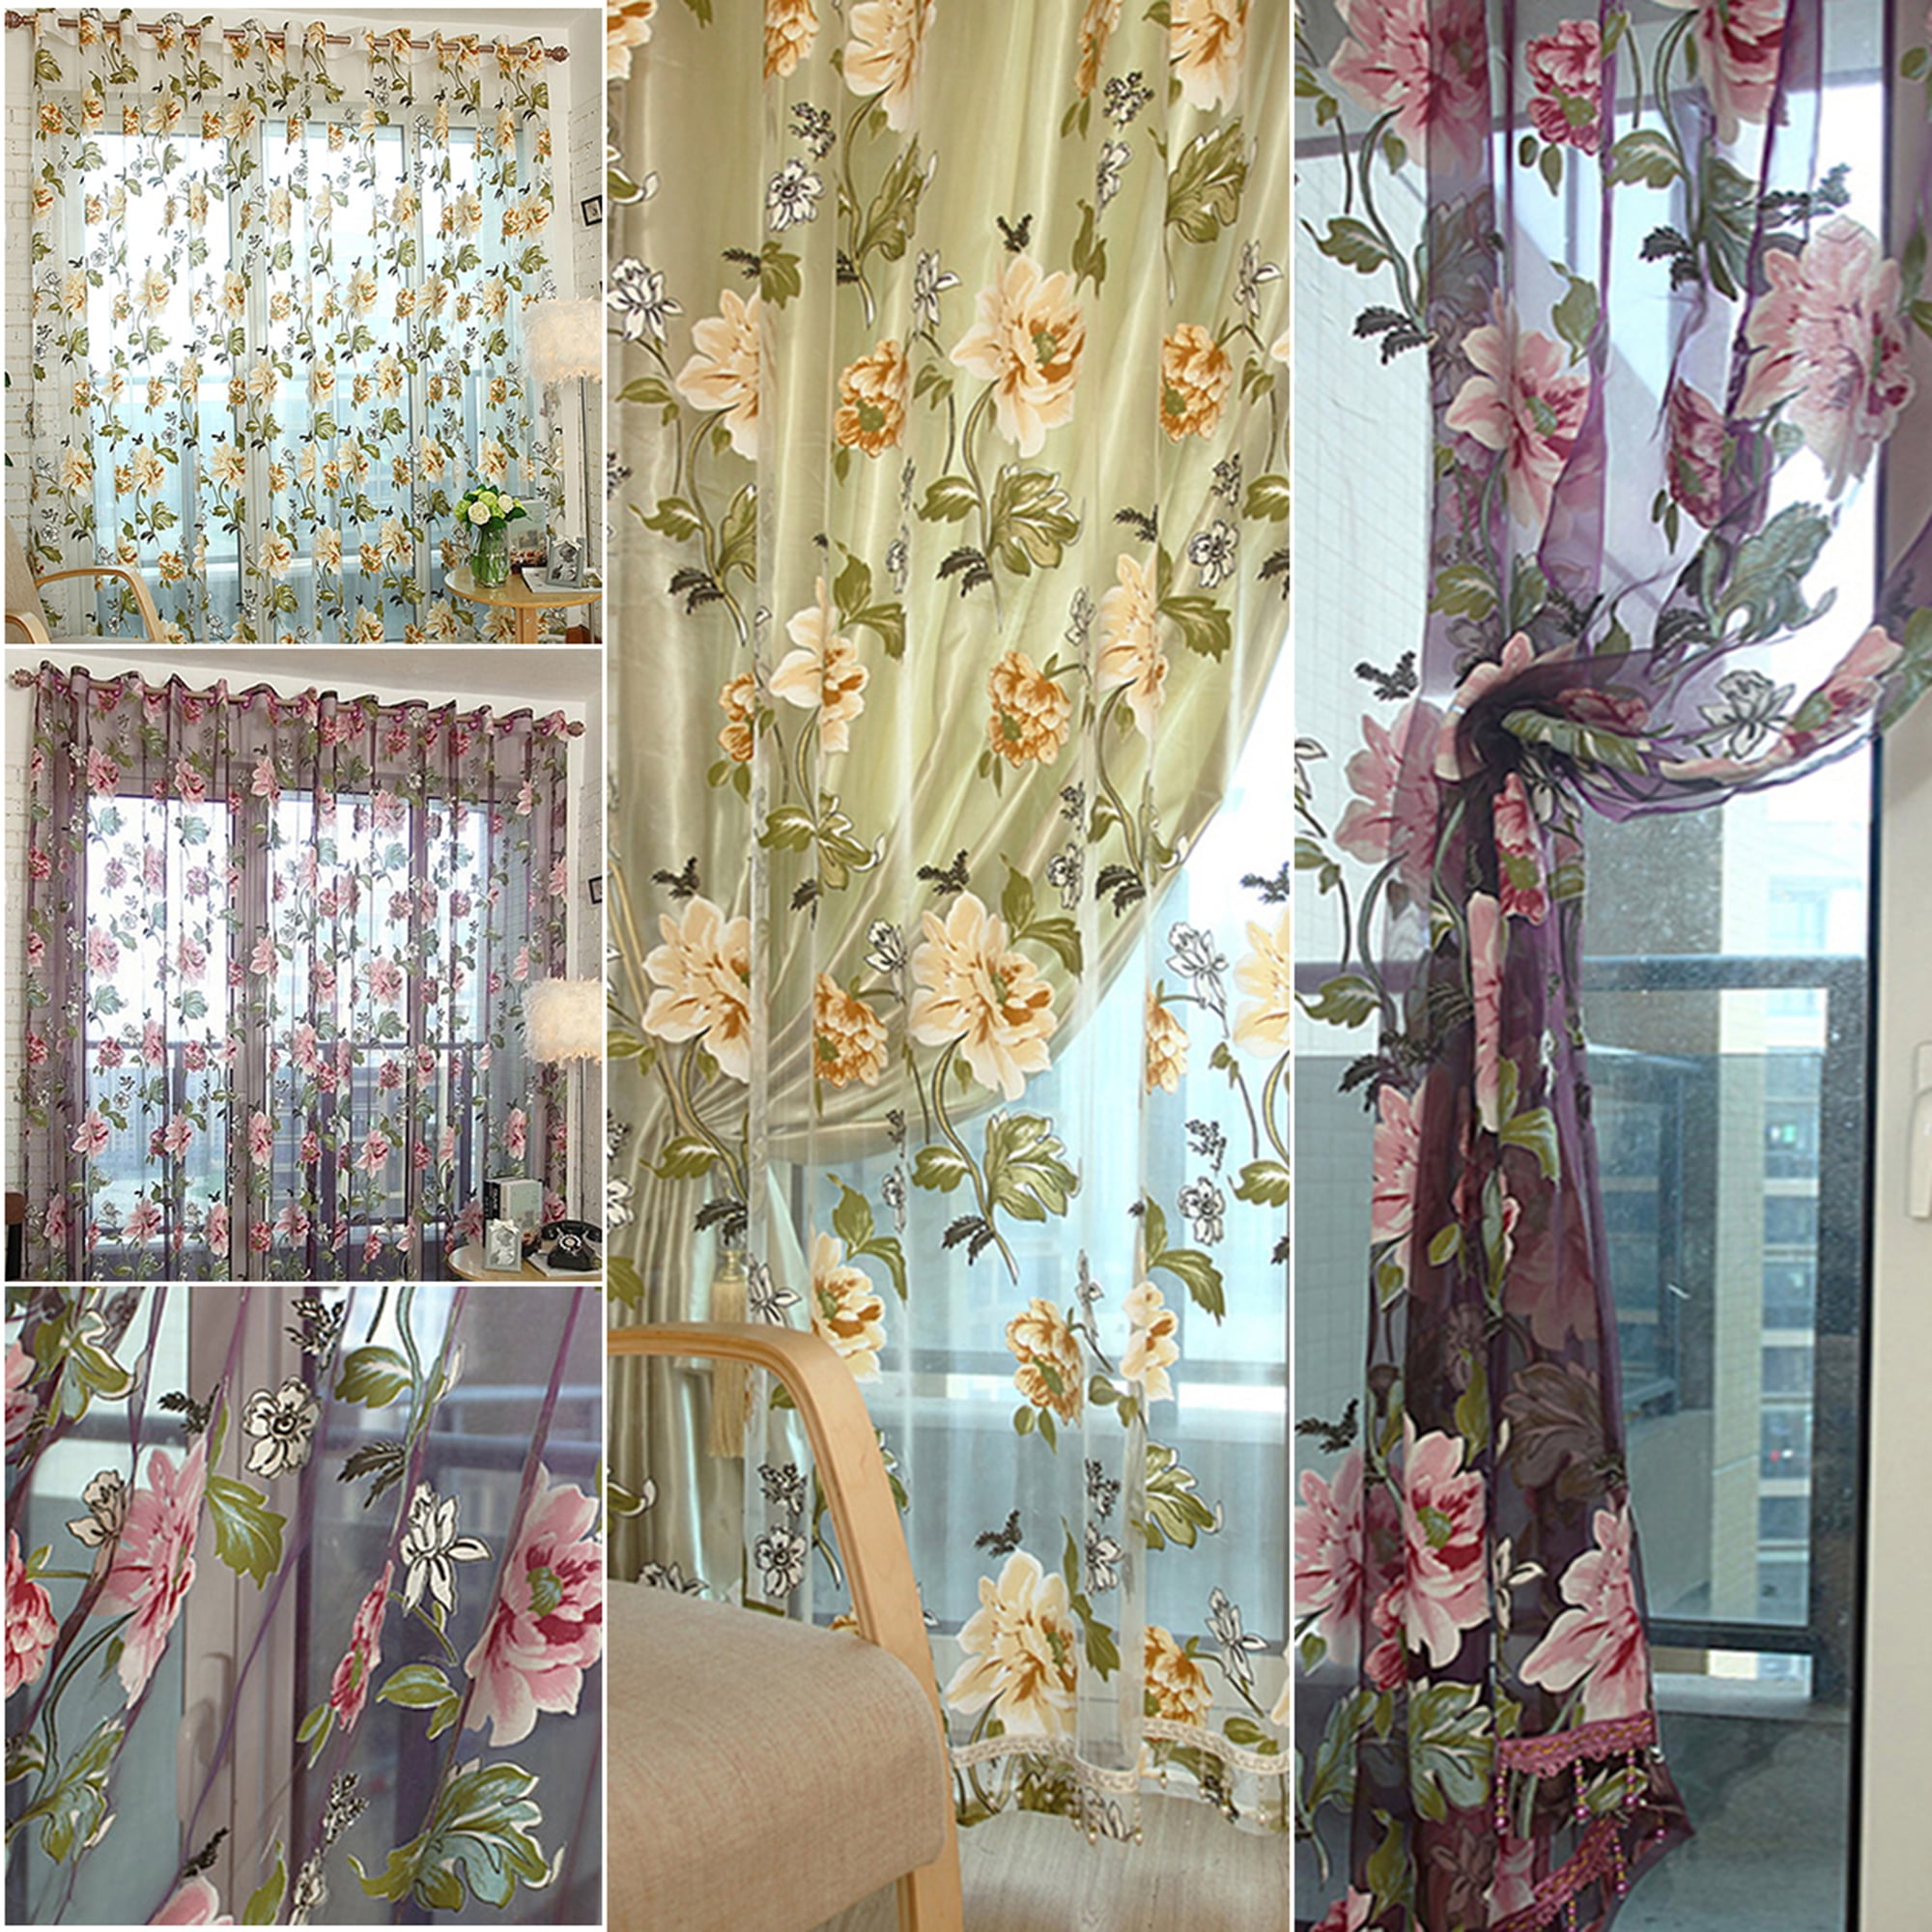 Details about   Romantic Floral Tulle Voile Door/Window Curtain Drape Panel Sheer Scarf Valance 